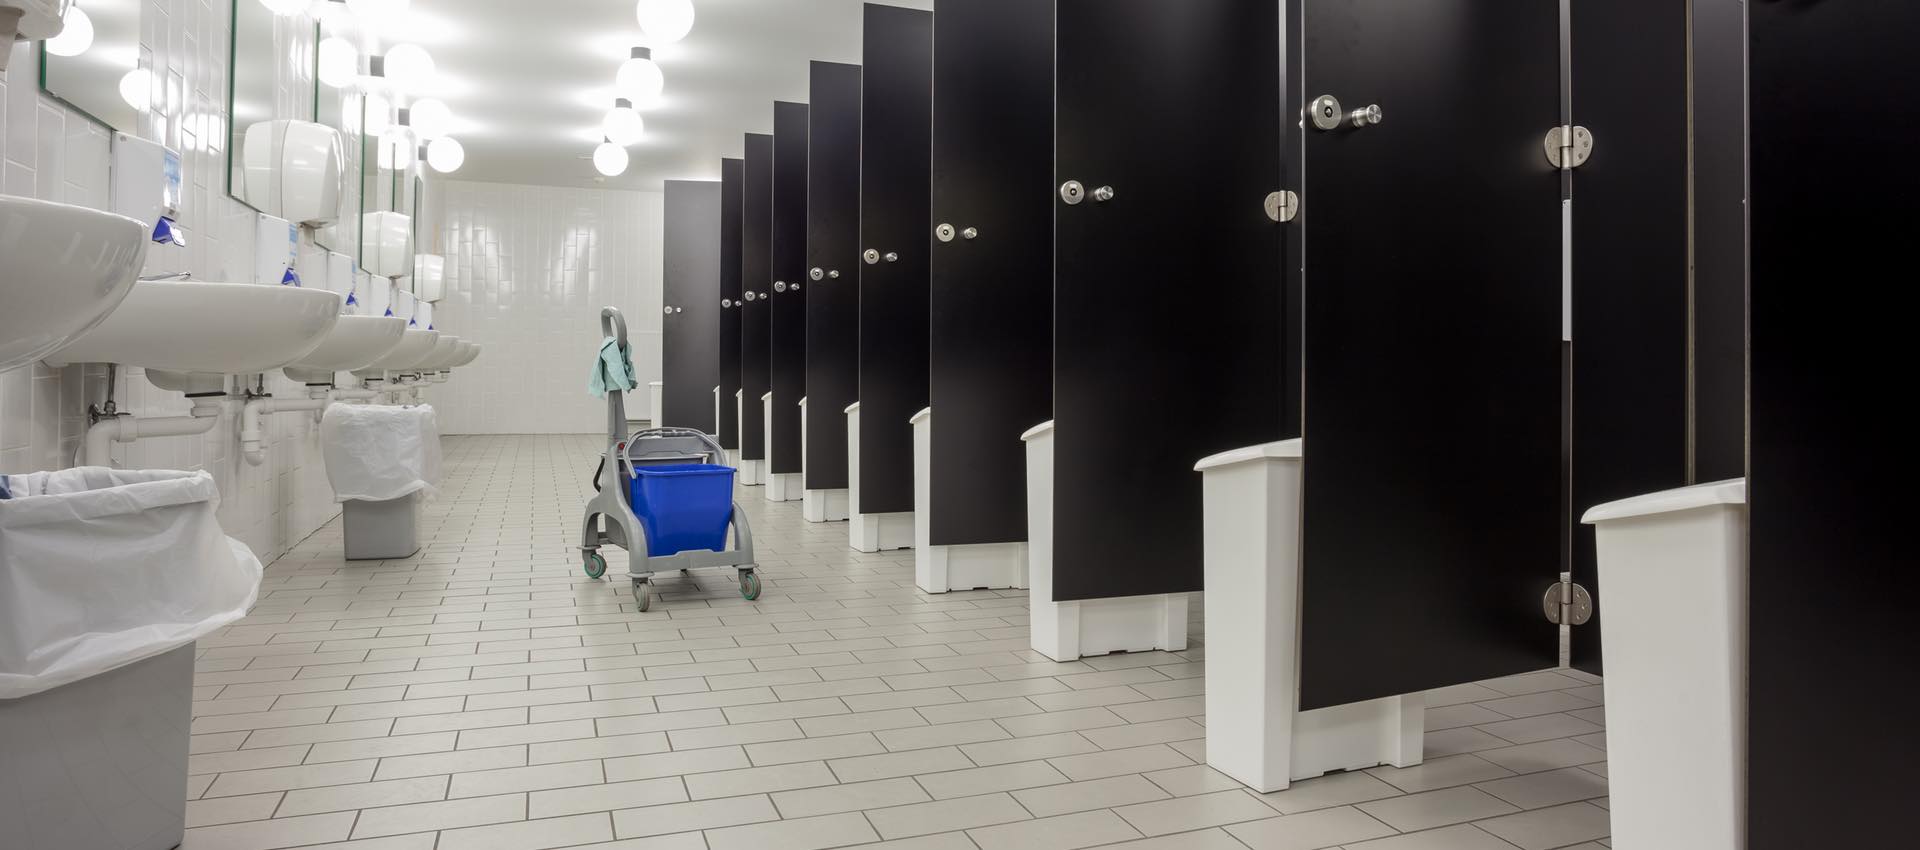 Commercial Restroom Cleaning Tips